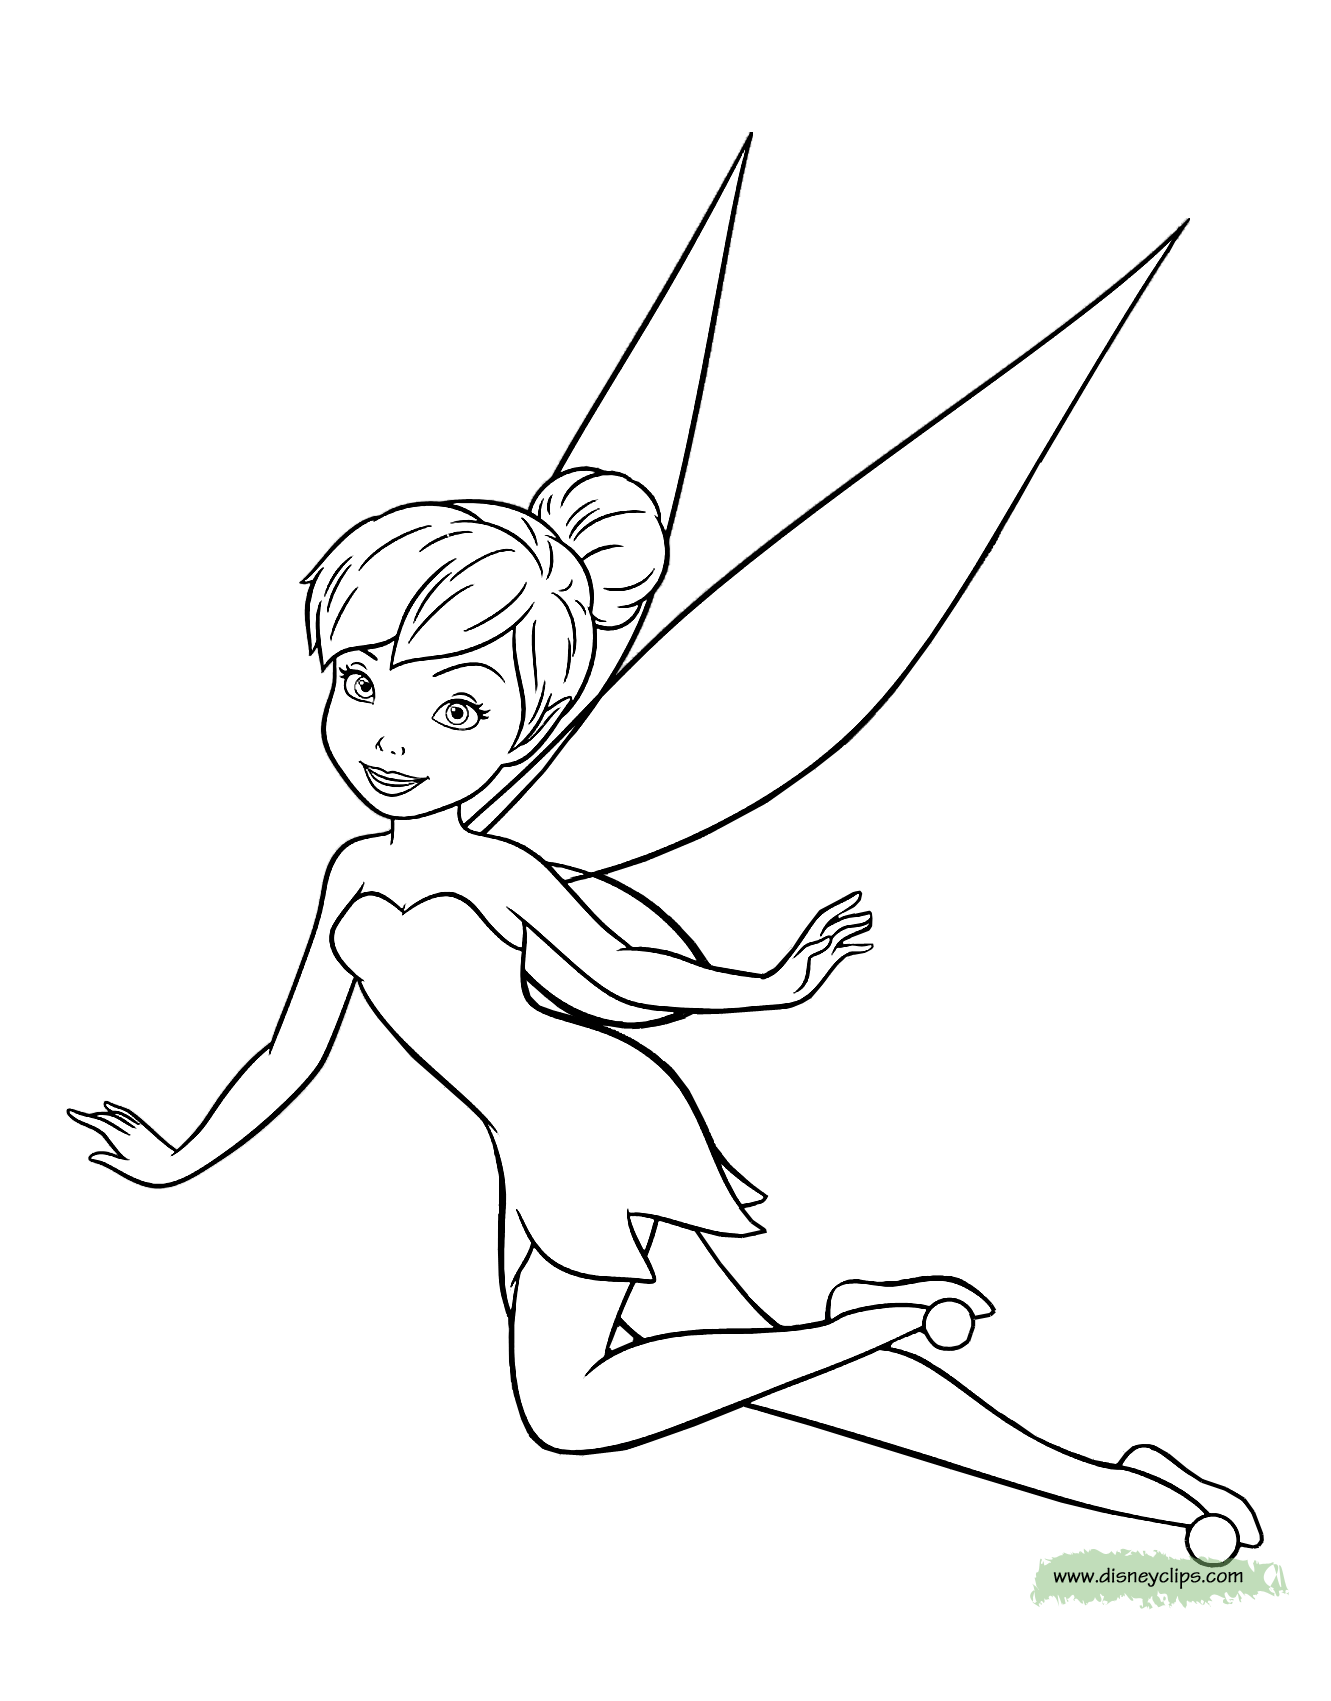 disney fairy pictures to color disney fairies39 tinker bell coloring pages disneyclipscom to fairy pictures color disney 